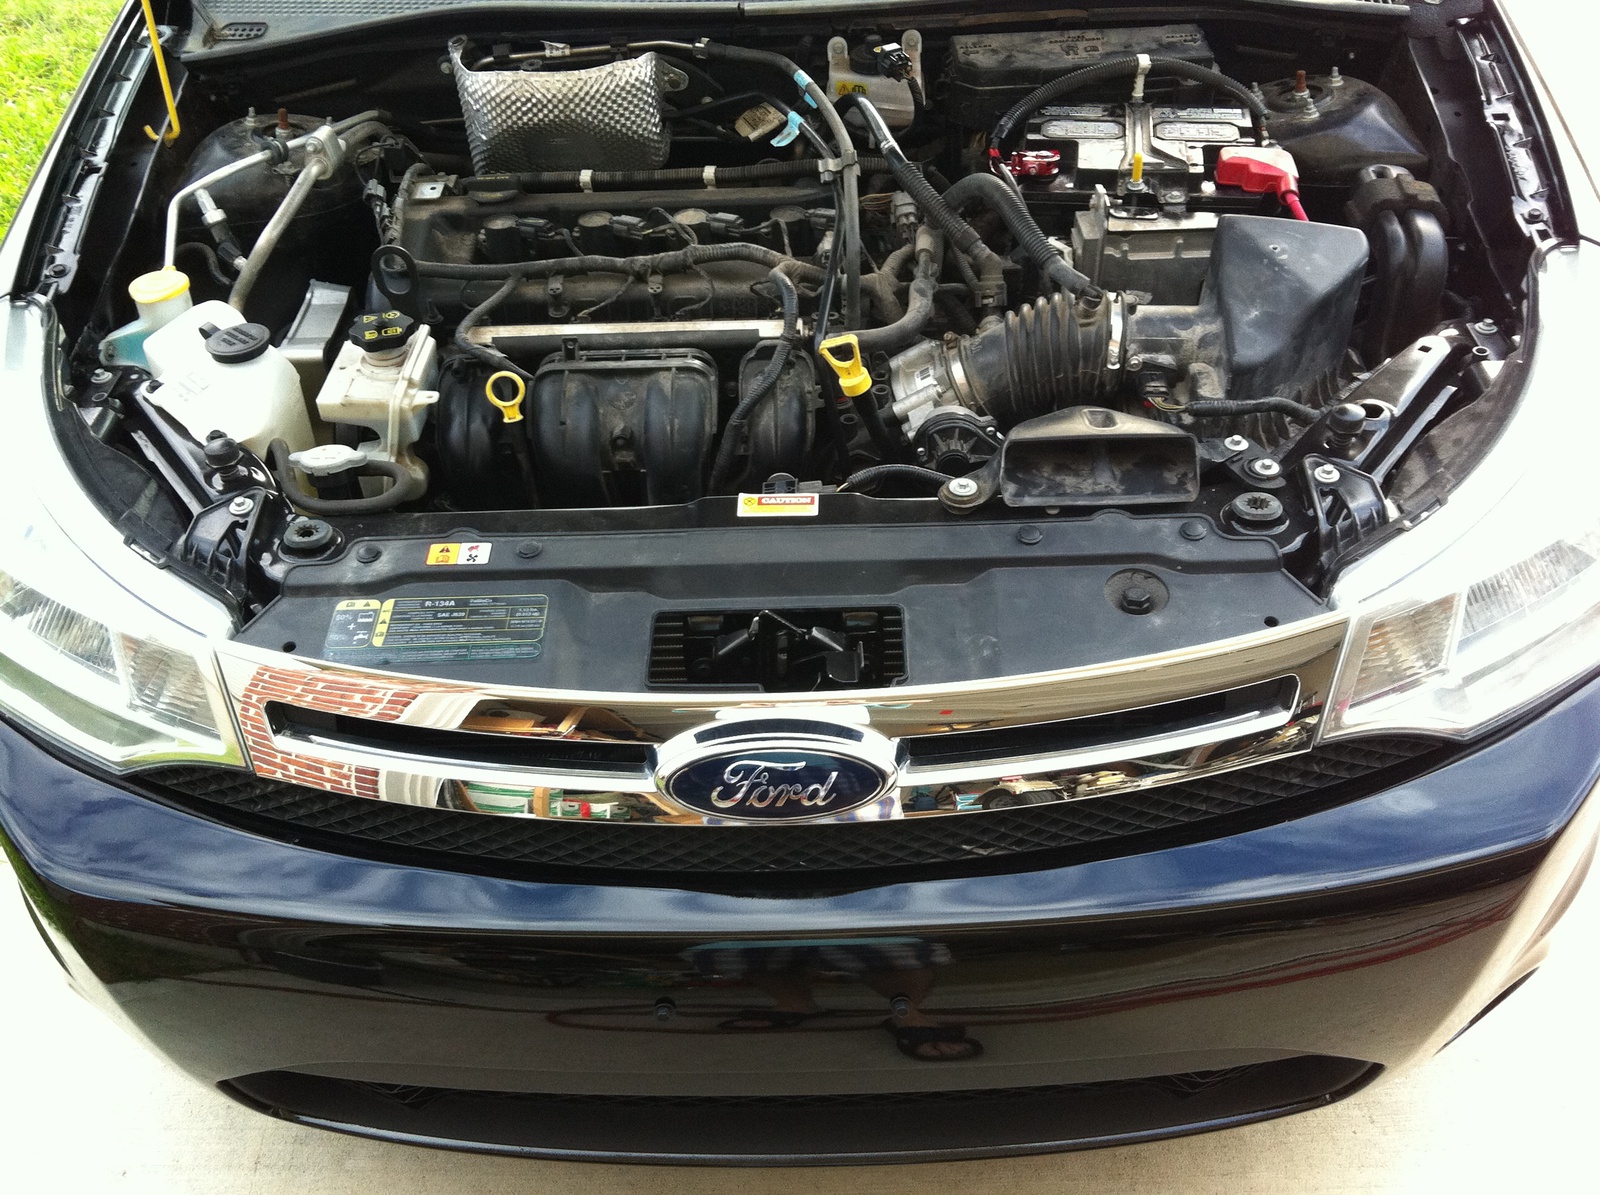 2009 Ford focus engine problems #3